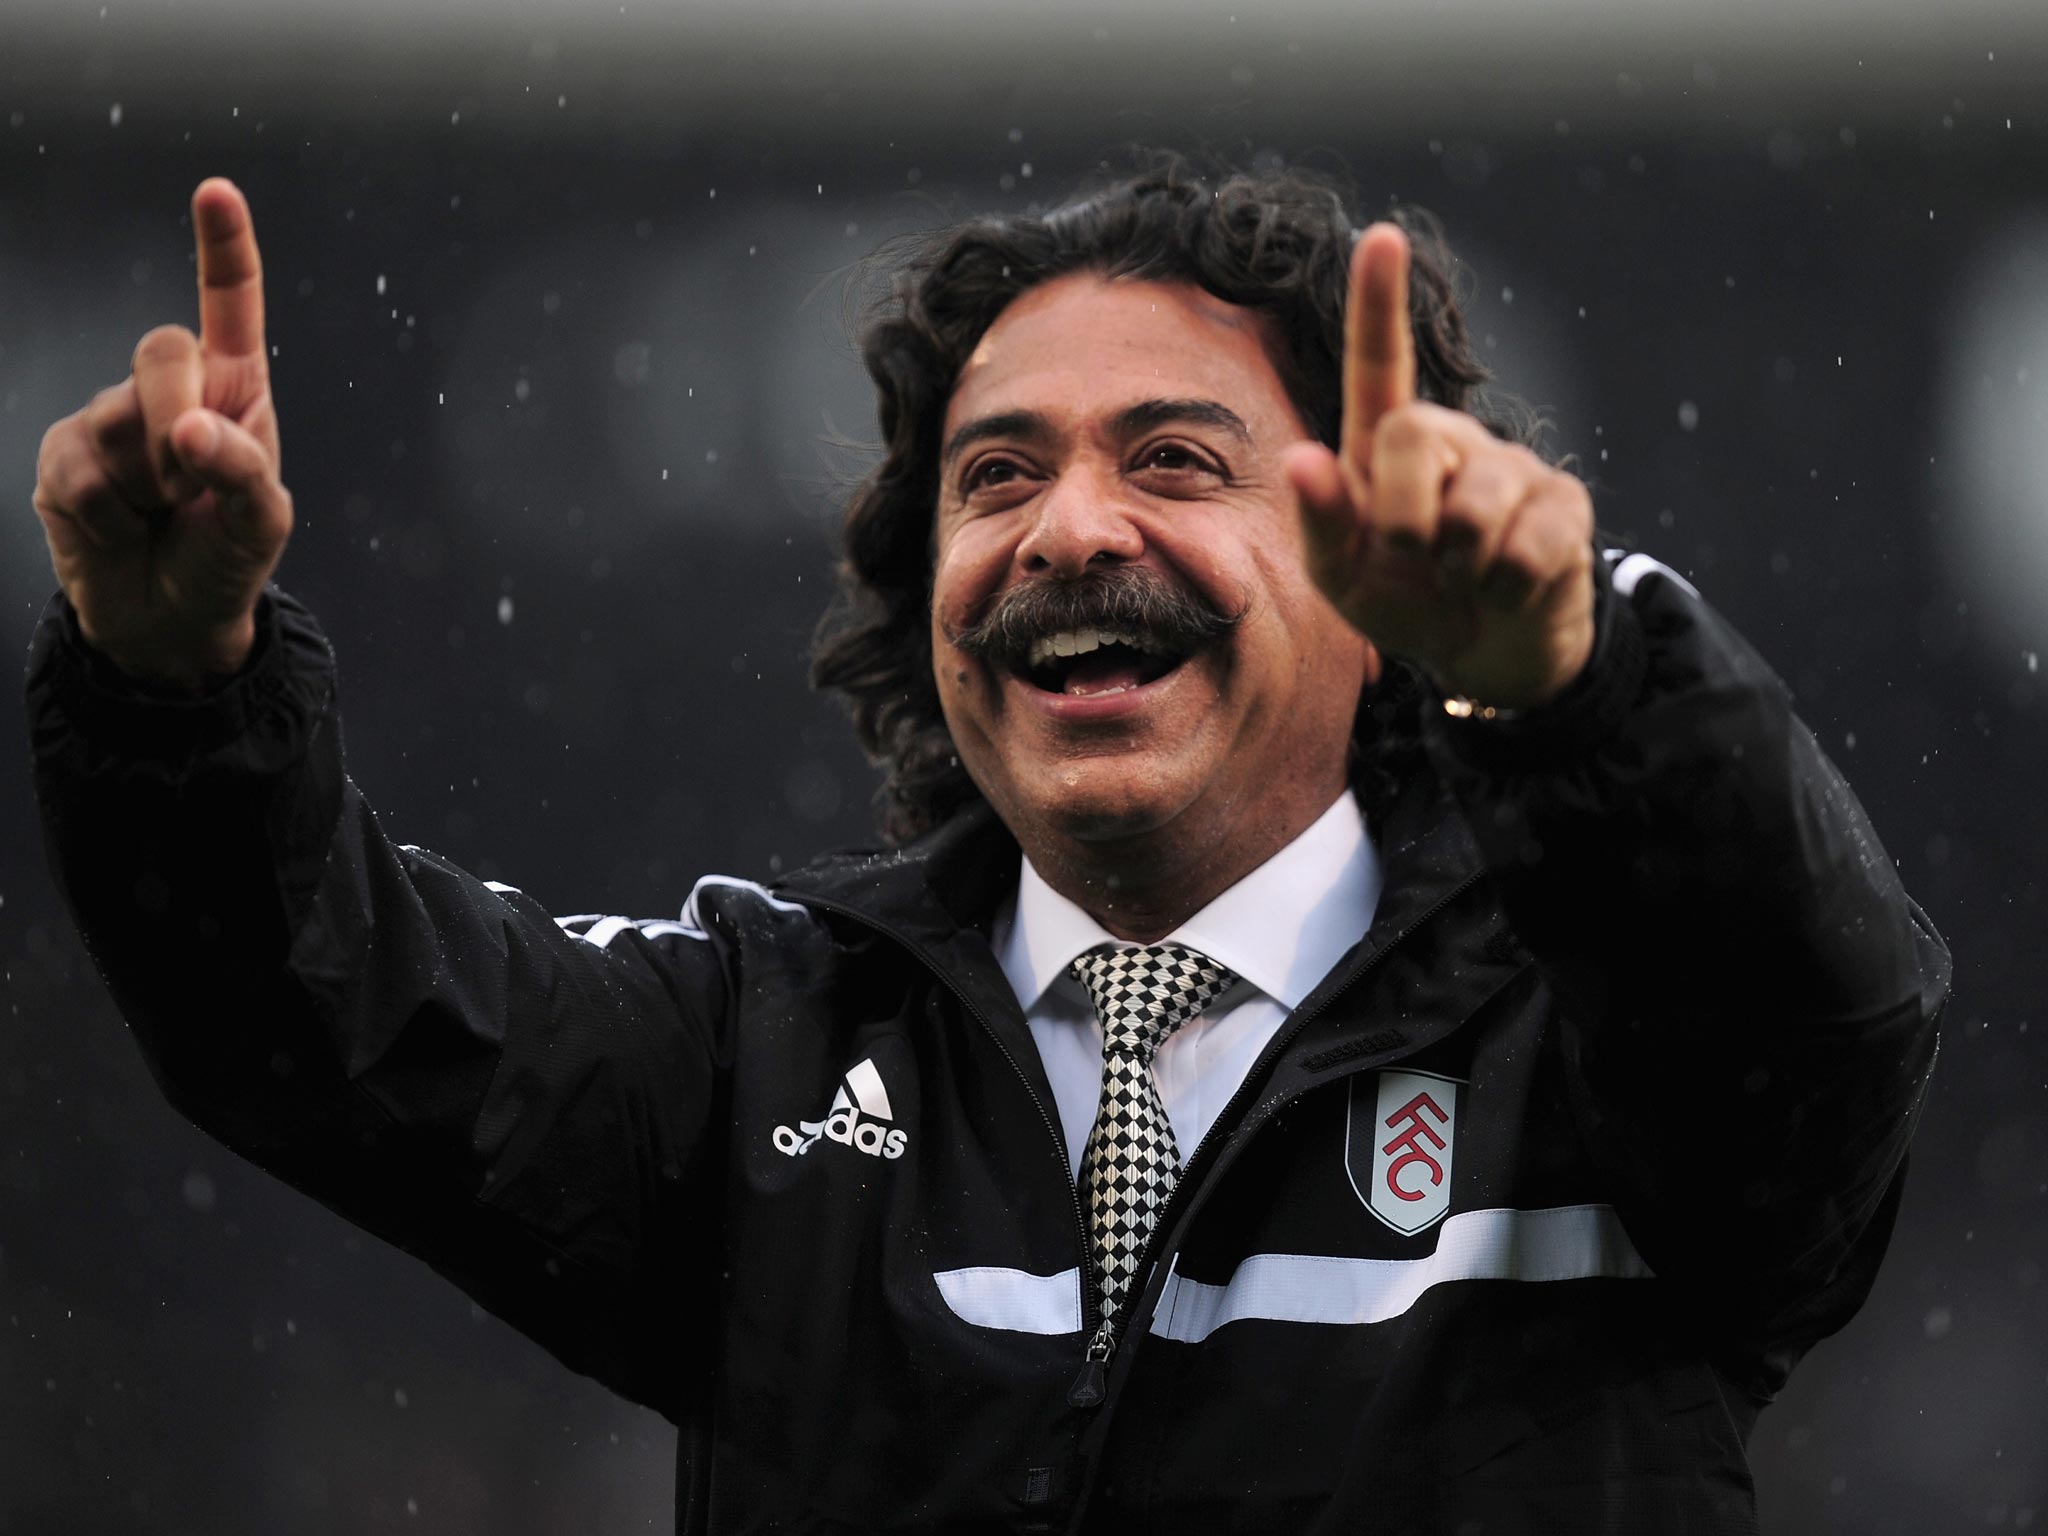 Shahid Khan has shown more faith in the coaches at Jacksonville Jaguars NFL team than in those he has employed at Fulham